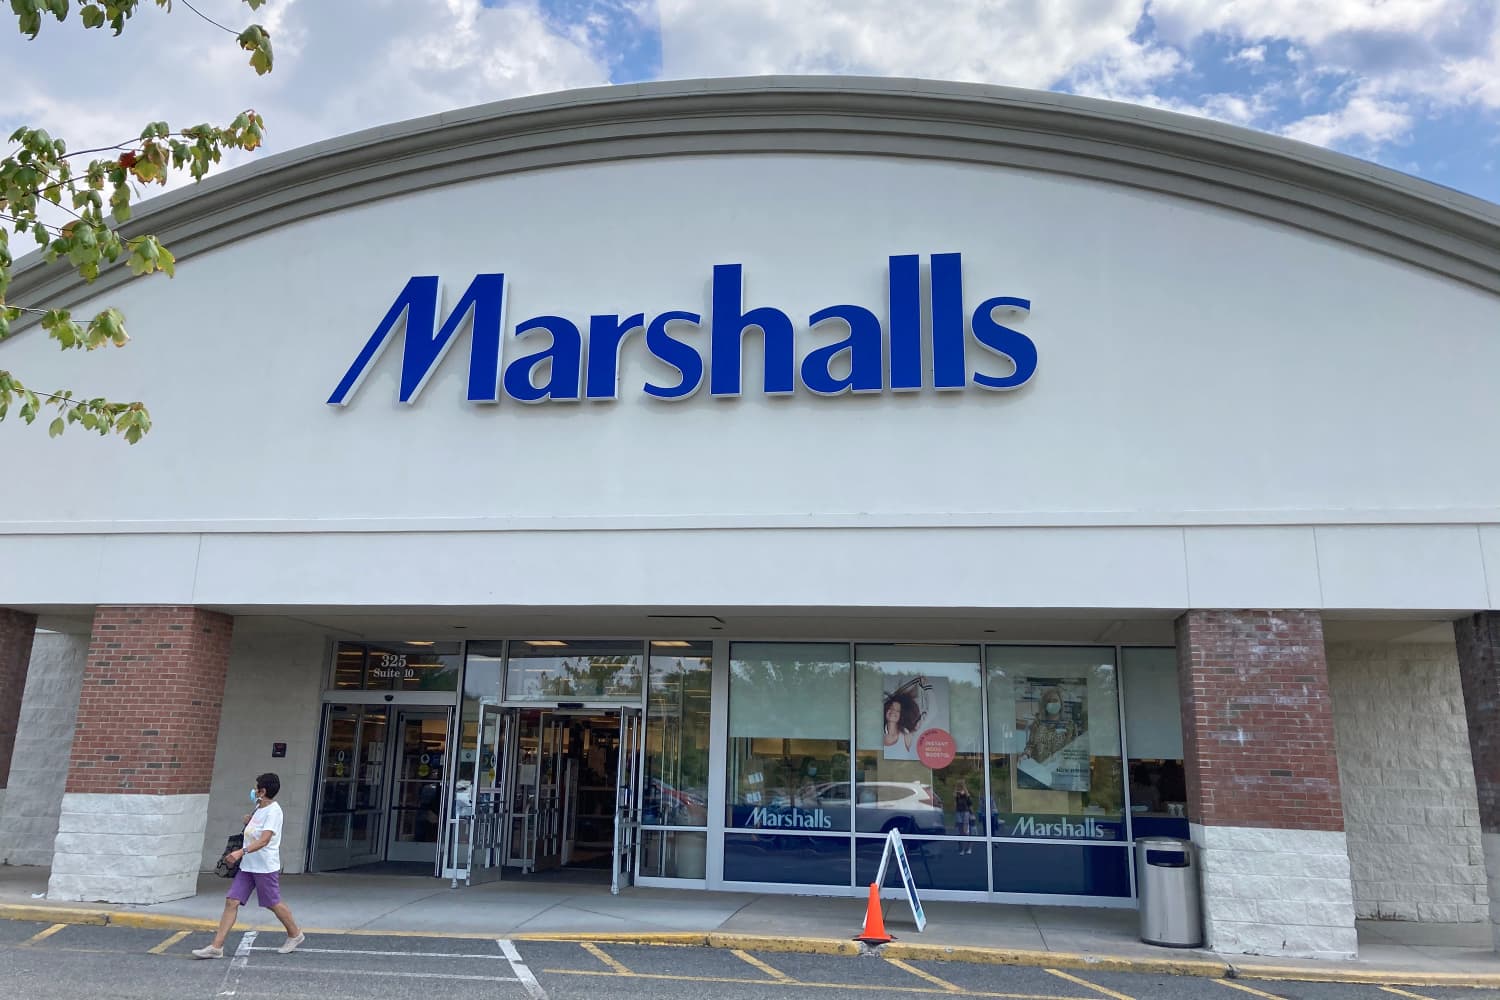 Marshalls Is Now Selling This "Luxury" Pantry Staple For an Unbeatable Price